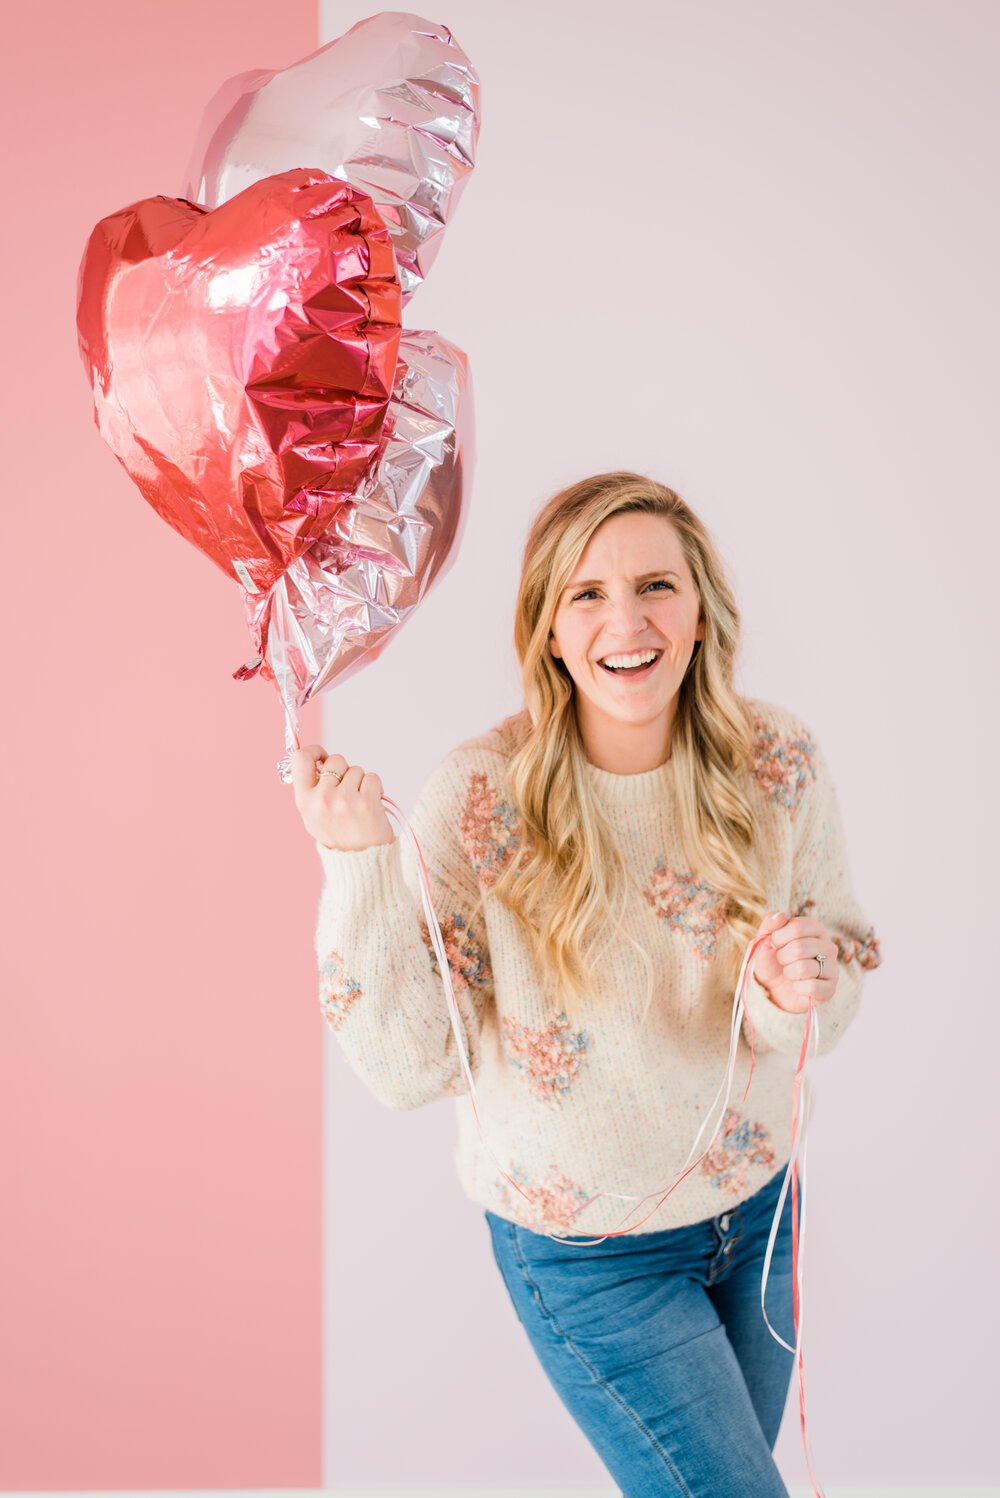  Atlanta-based photographer, Jacquie Erickson smiles while holding a bouquet of heart balloons. Client questionnaire Momtog course streamline workflow small business helpers #planoly #dubsado #pixiset #tailwind #theunburdenstudio 